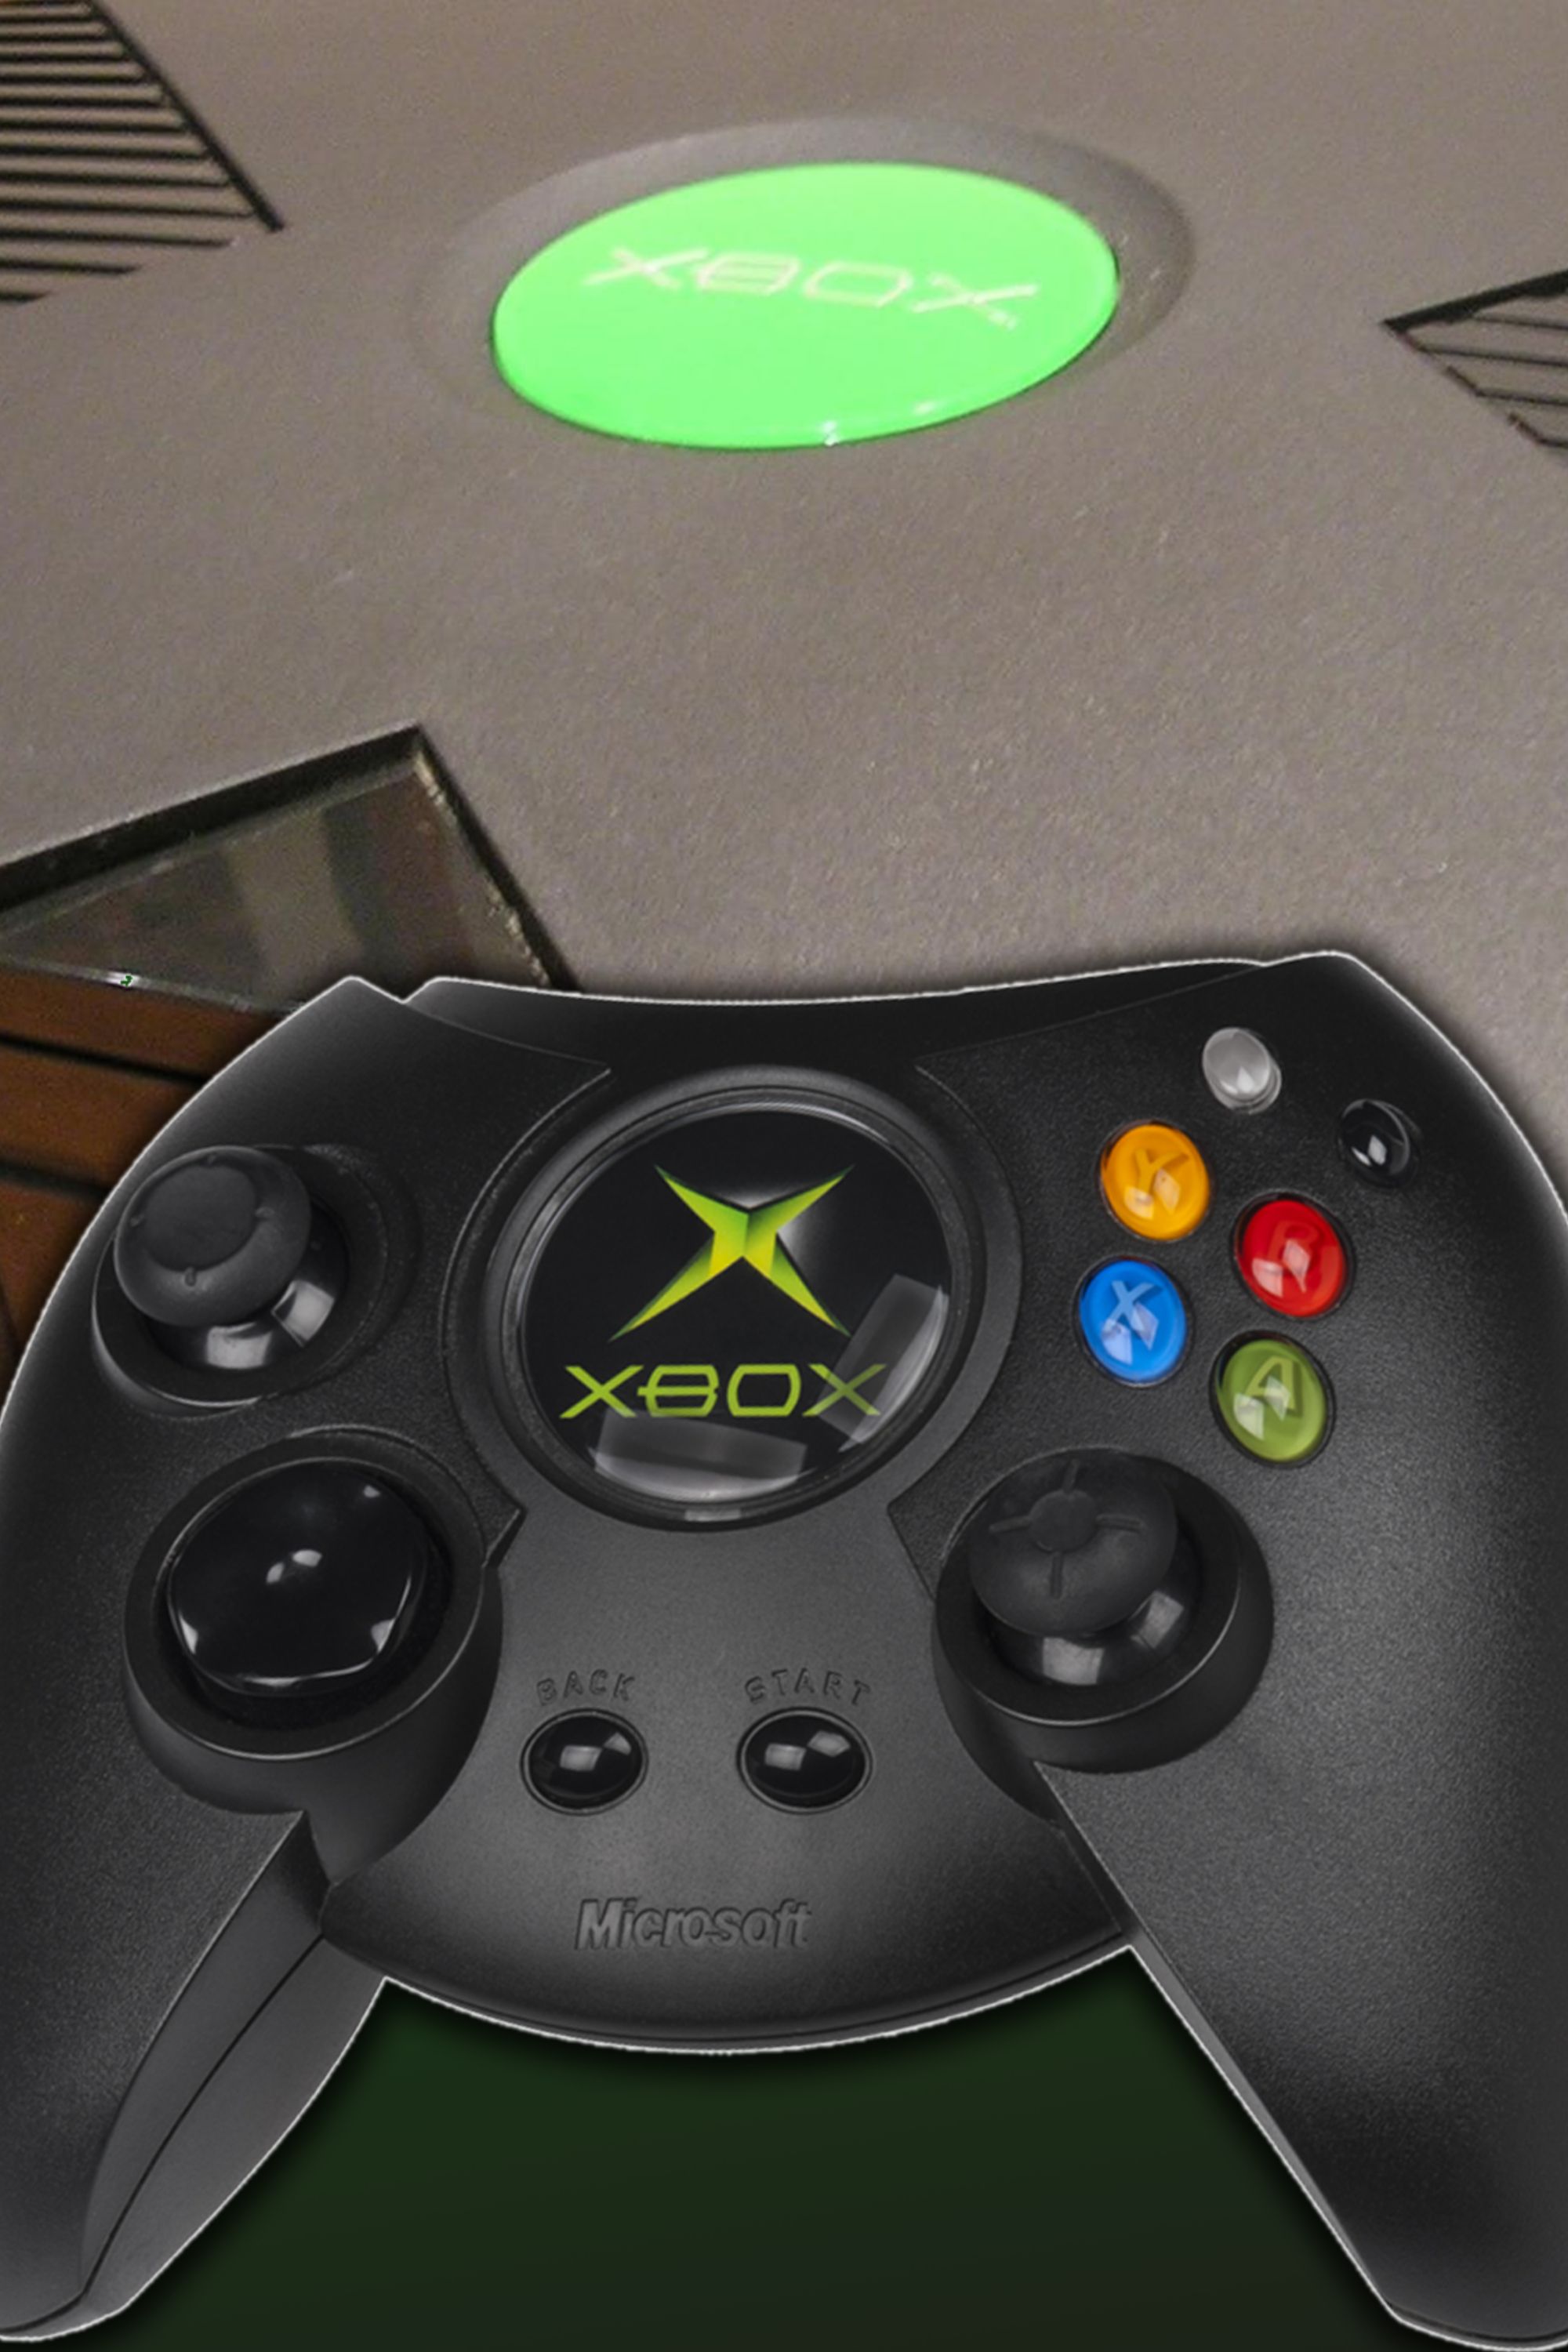 Close up of the original Xbox controller and console